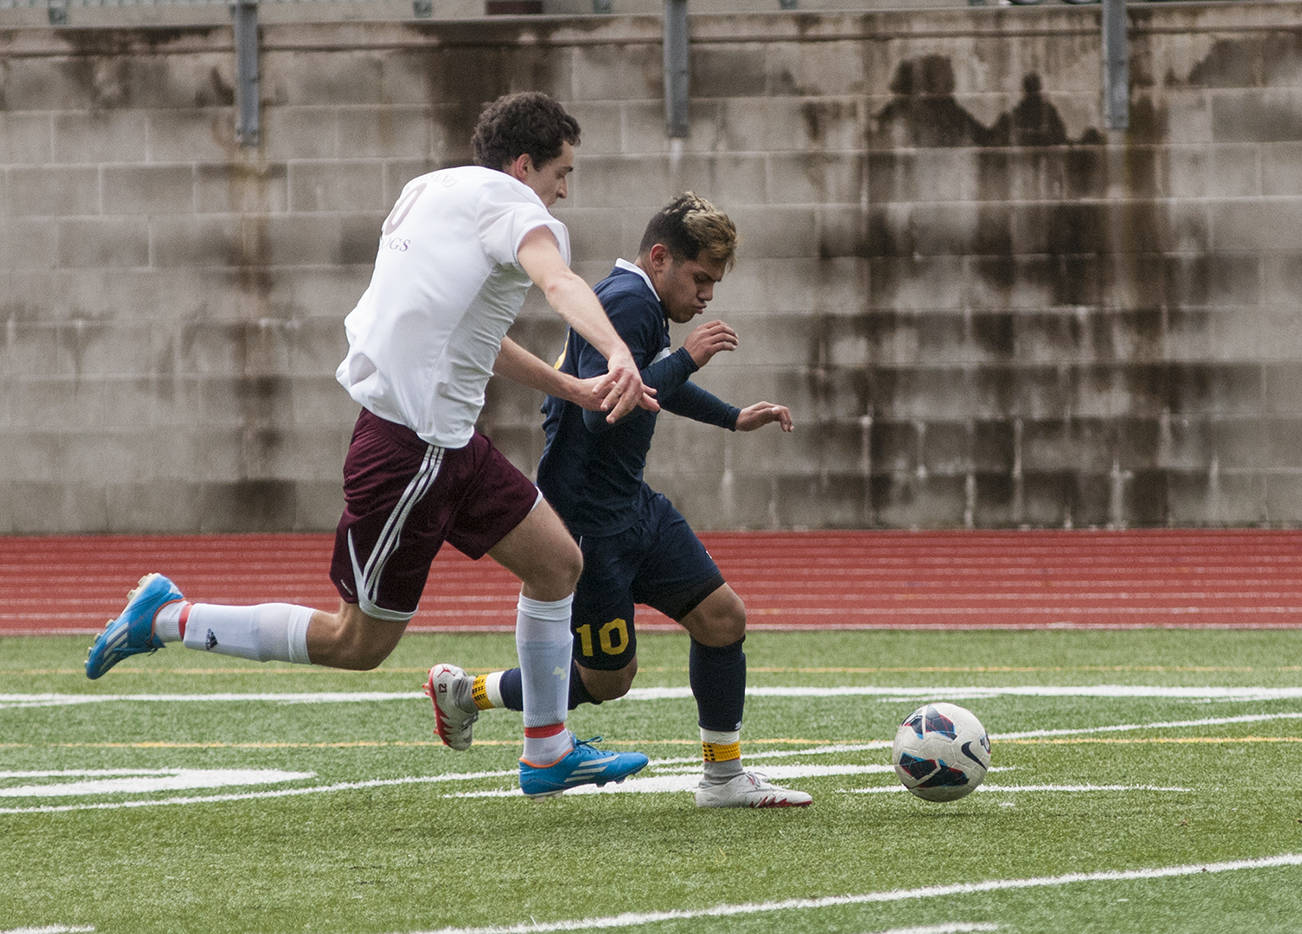 (Brendan Carl | The Daily World) Aberdeen’s Miguel Torres tries to race past Montesano’s Riccardo Marangon during a non-league soccer match at Jack Rottle Field on Saturday. Torres finished with a hat trick against the Bulldogs in a 4-0 Aberdeen victory.